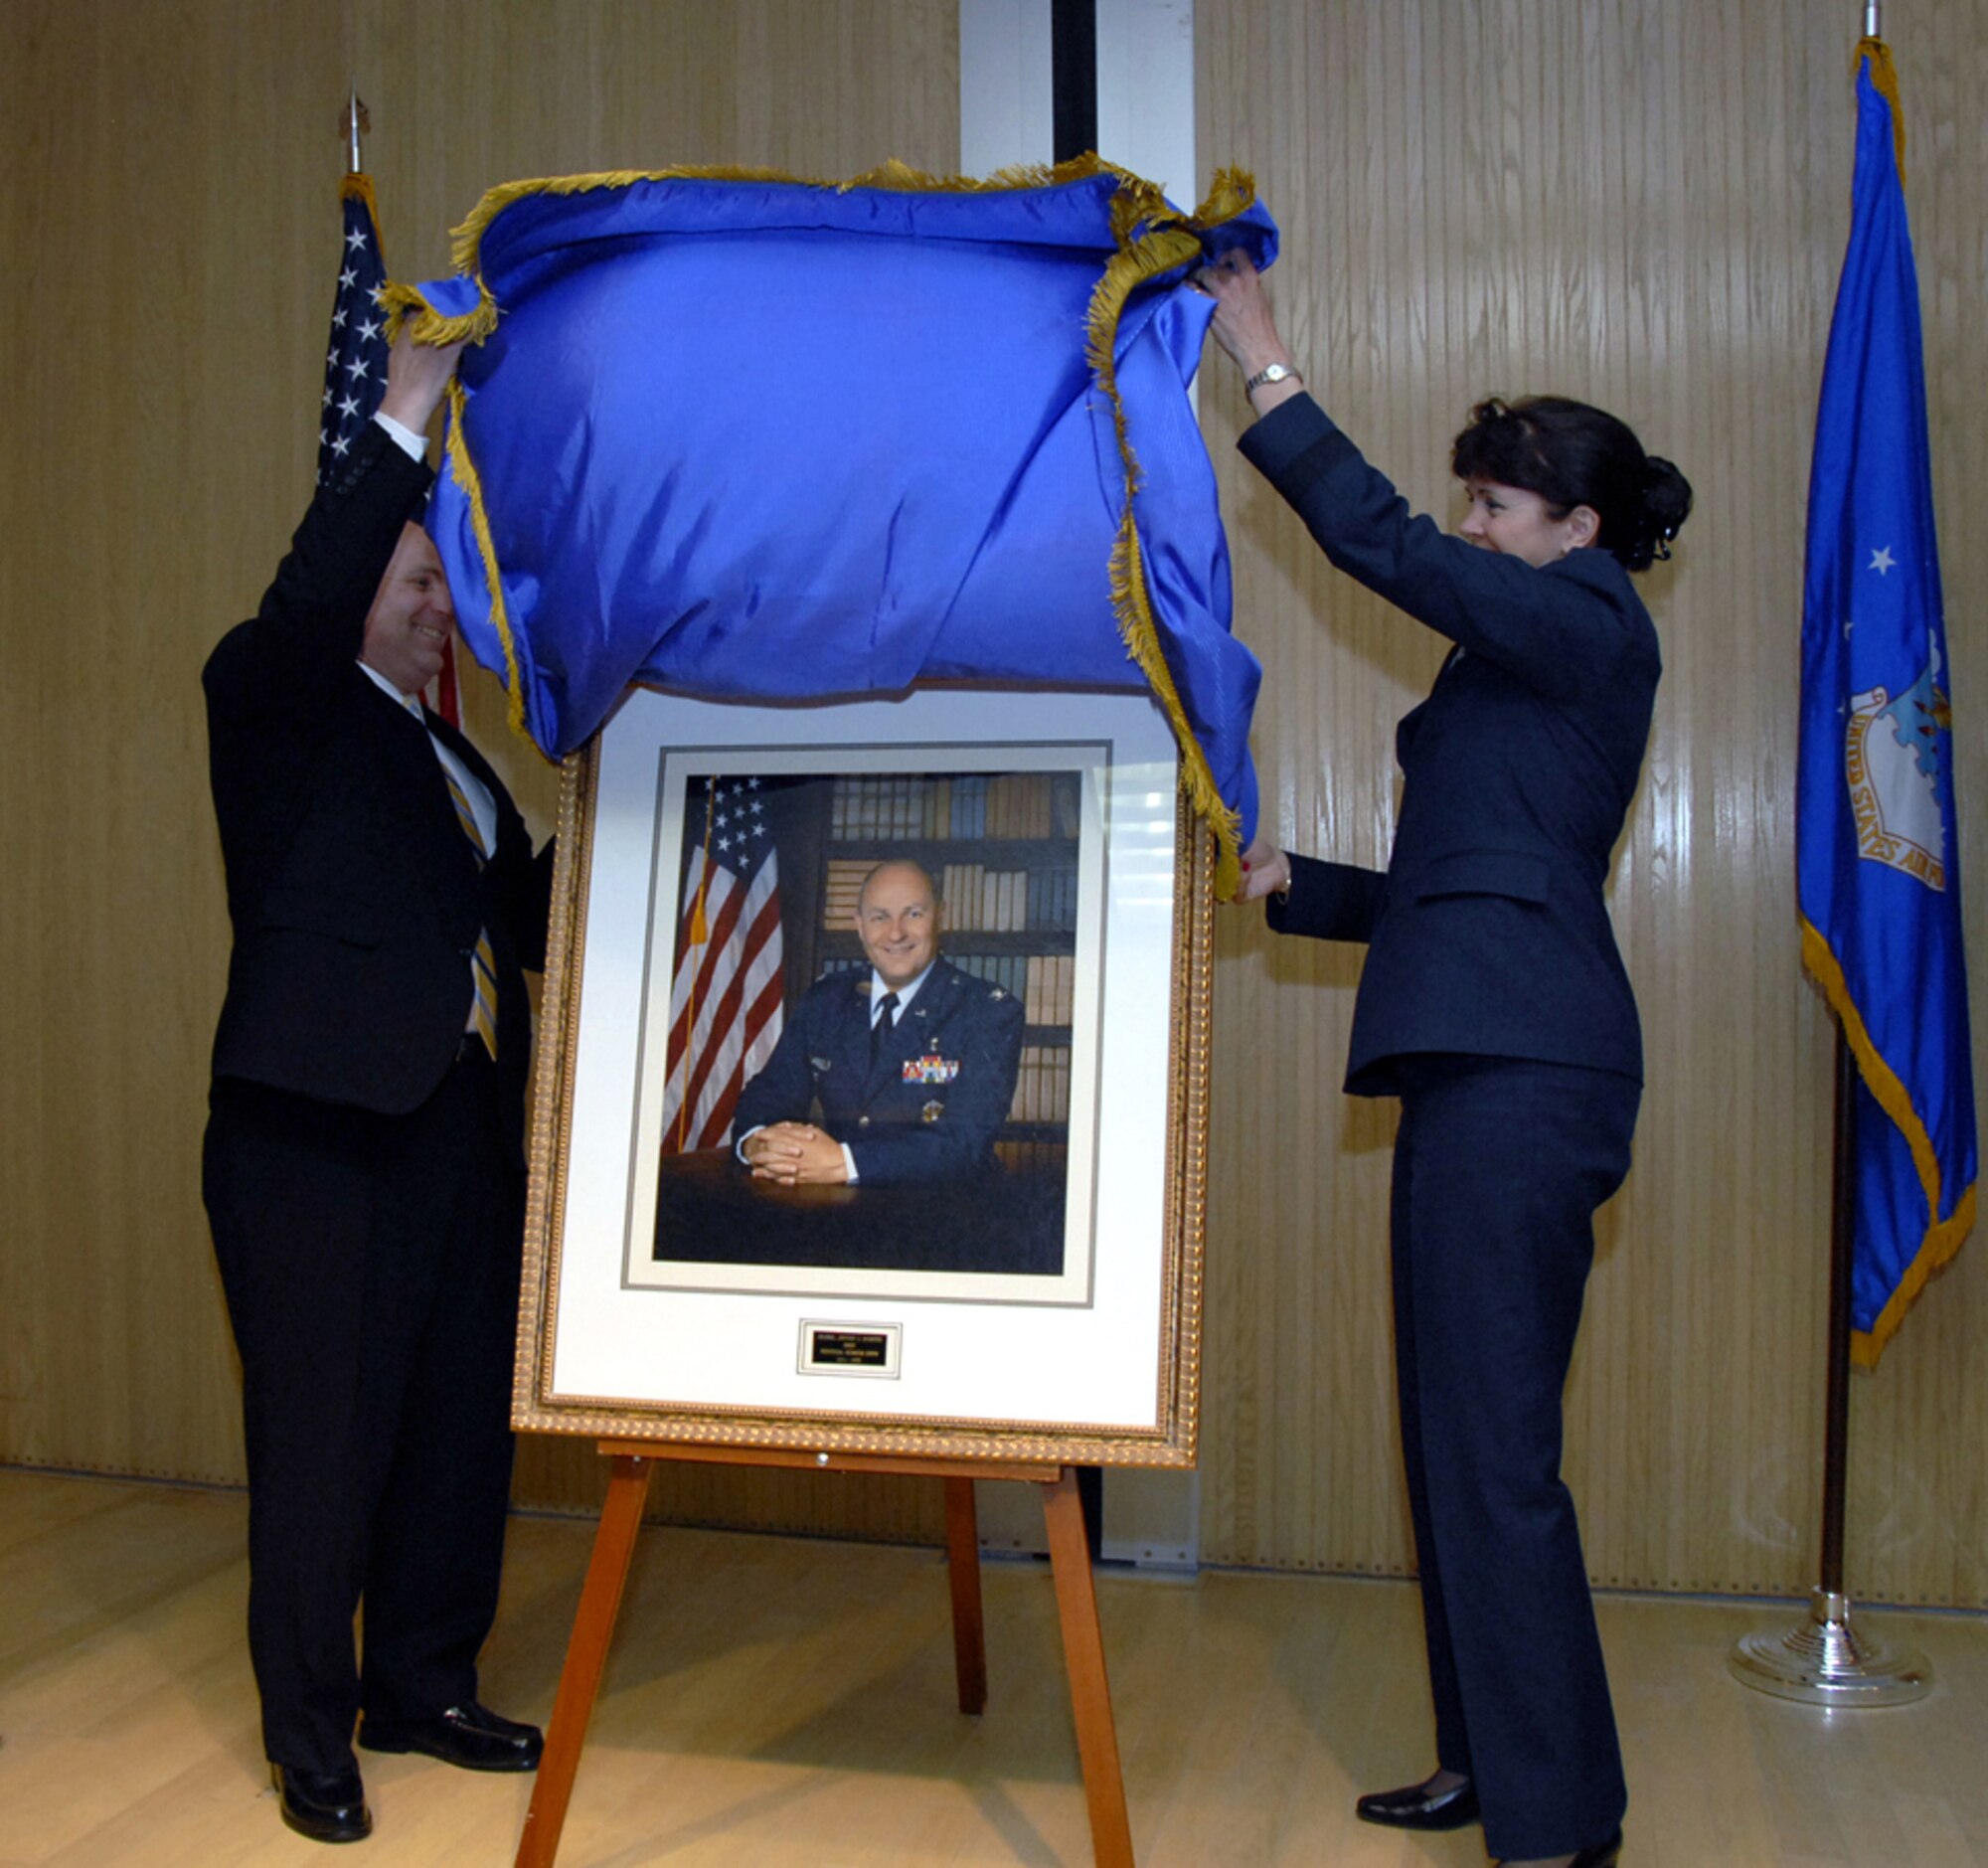 Retired Air Force Col. Jeffrey Sventek and Biomedical Sciences Corps Chief Brig. Gen. Theresa Casey unveil a portrait of Colonel Sventek.  The portrait is the latest in a large collection of former BSC chiefs portraits that adorn the hallway walls of Bldg. 1900. (U.S. Air Force photo/Sandy Wassenmiller)